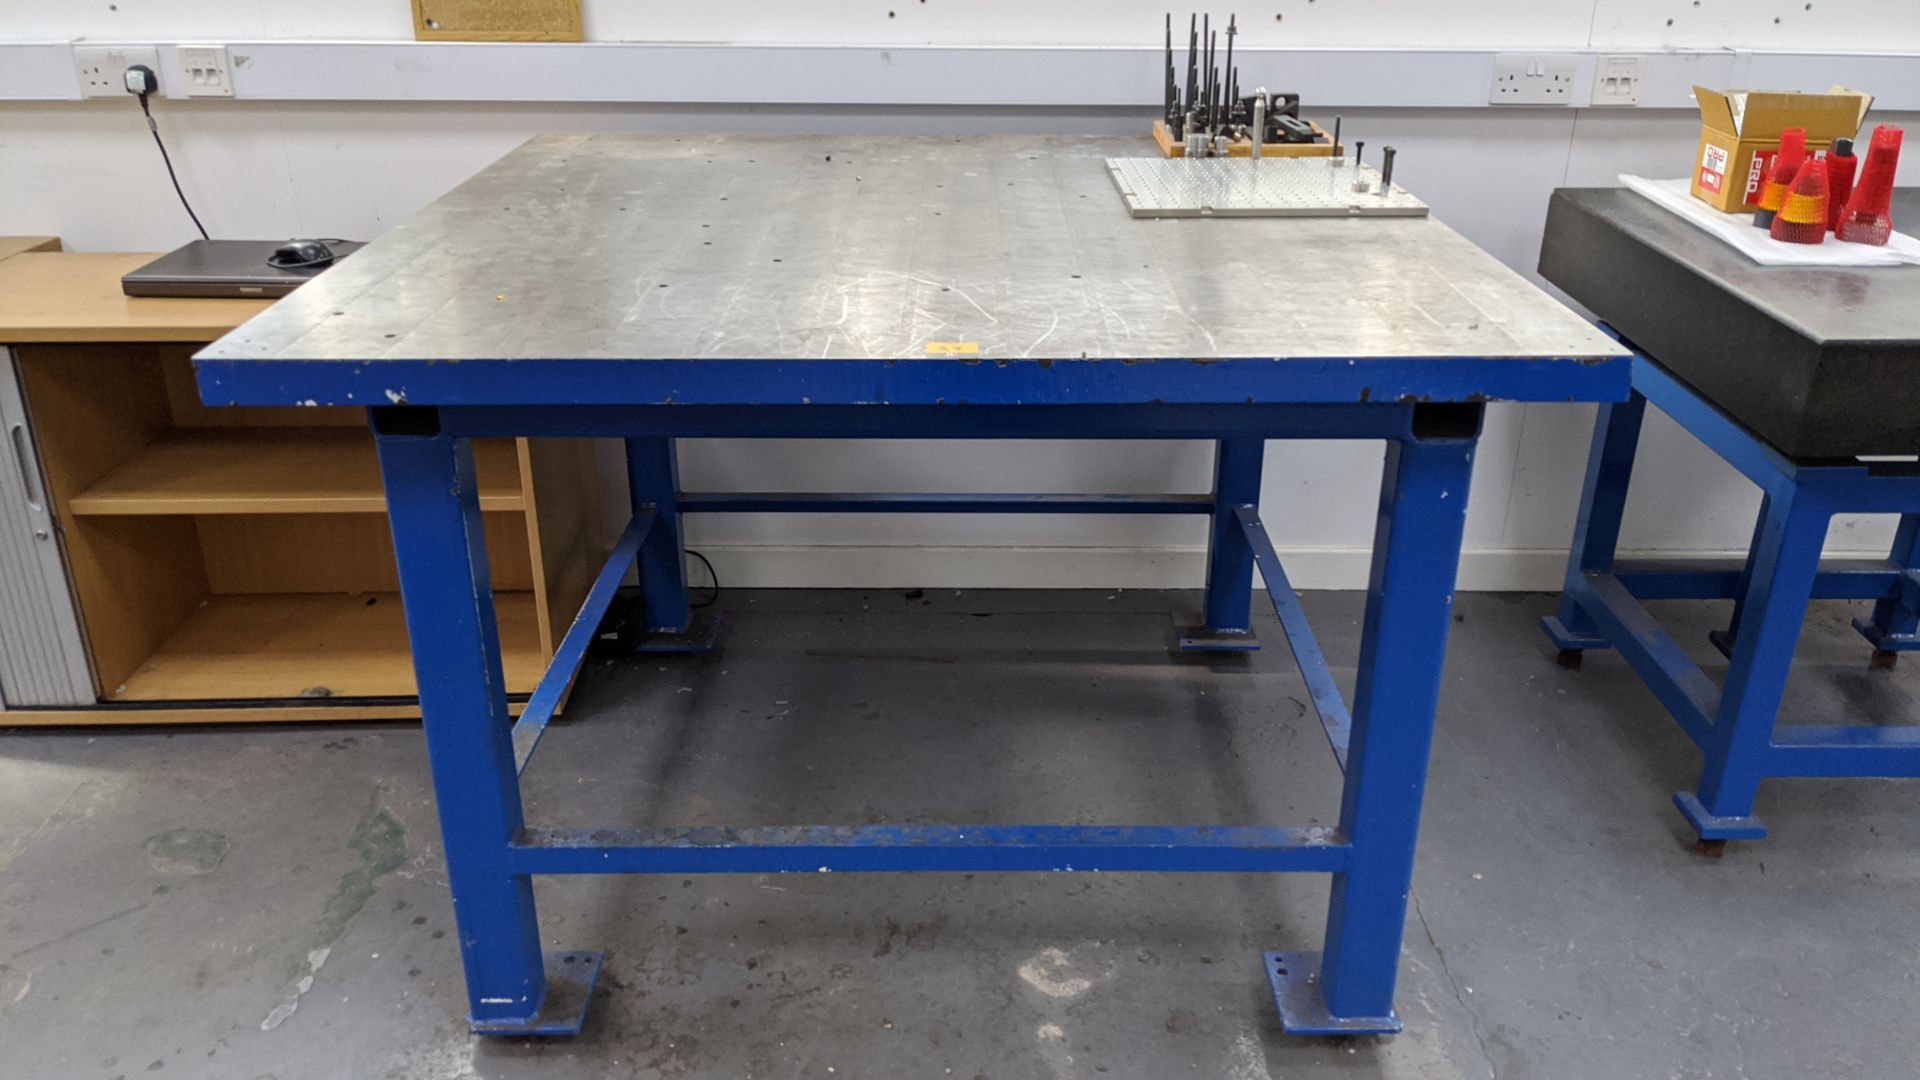 Heavy-duty metal inspection table with top measuring approx. 1377mm x 1377mm, including ancillary